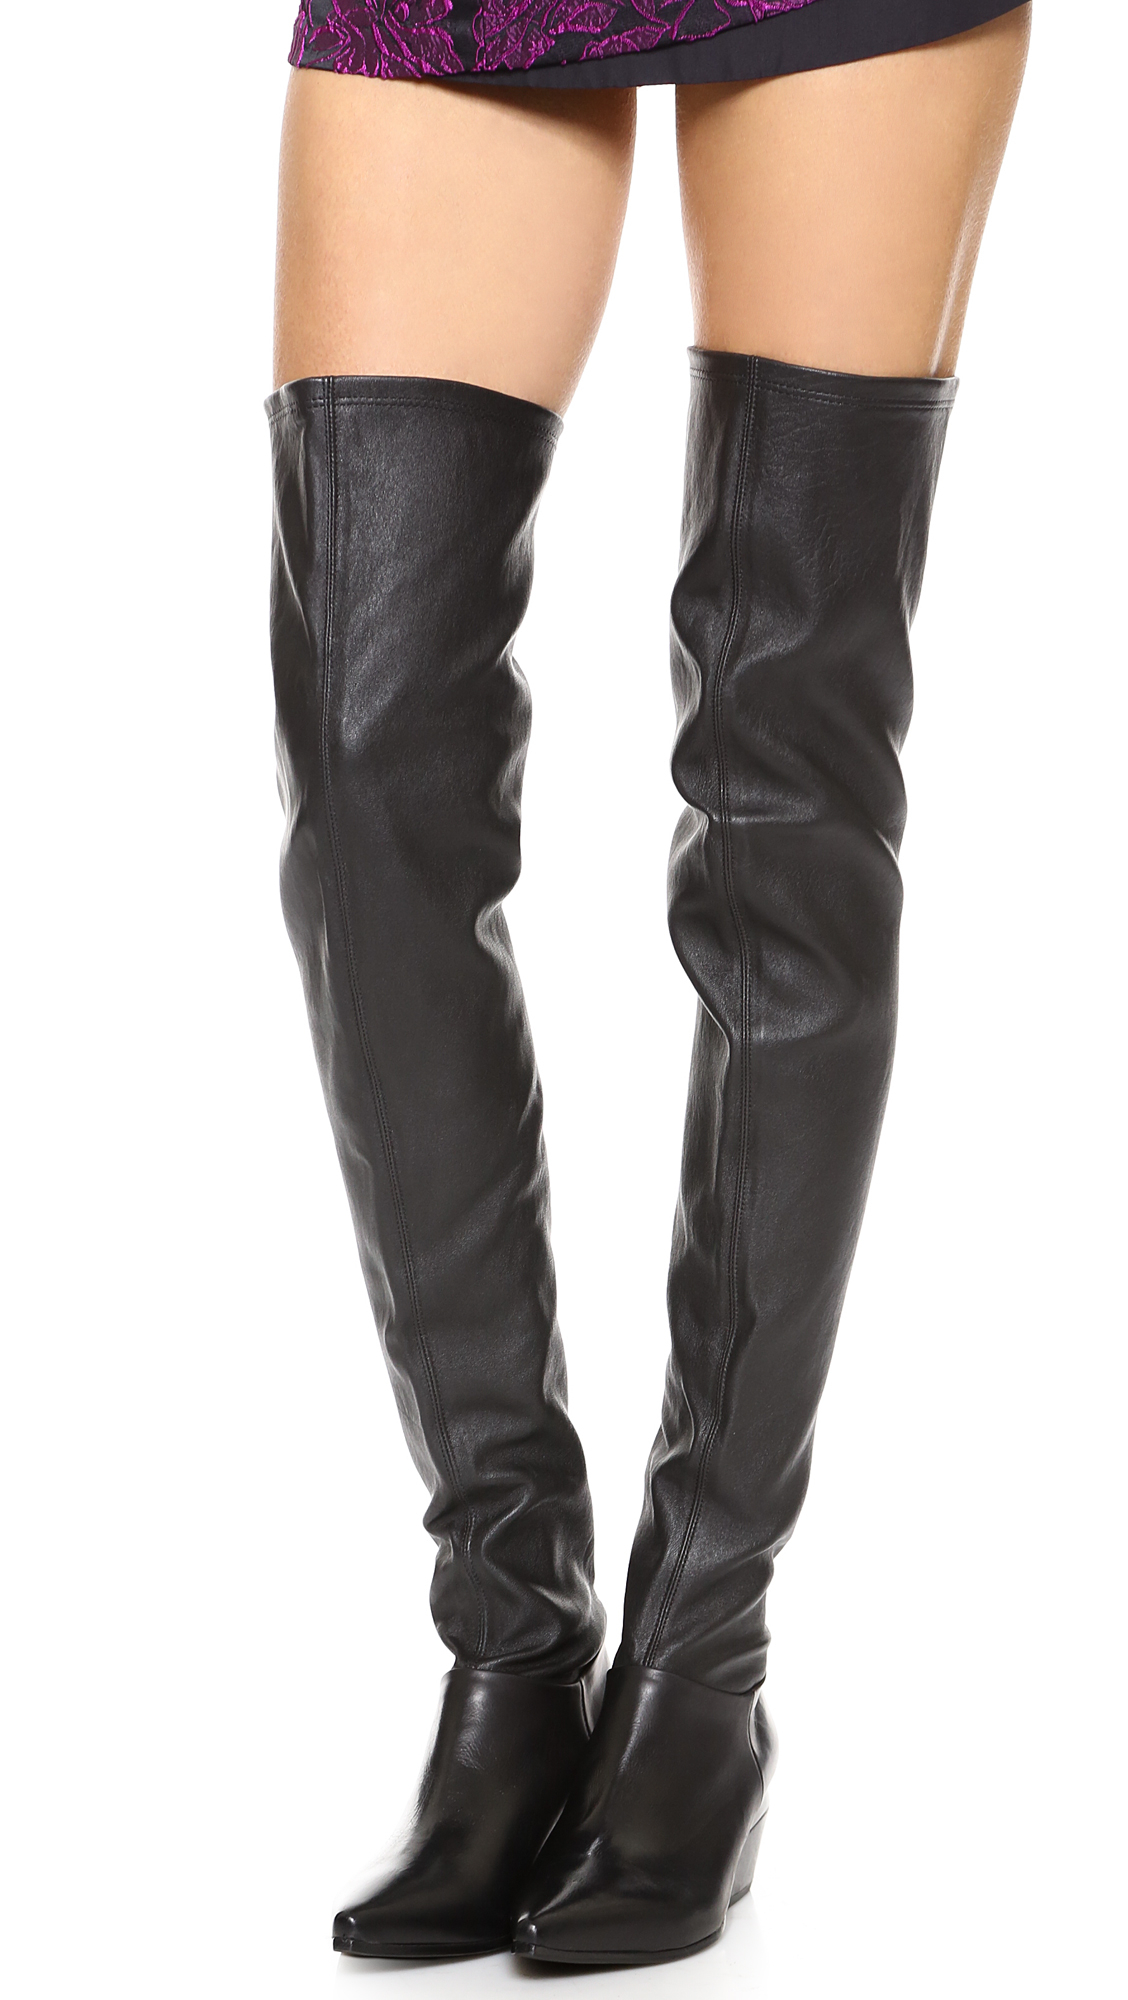 Lyst - Vic Matié Prometeo Erse Over The Knee Boots - Black in Black